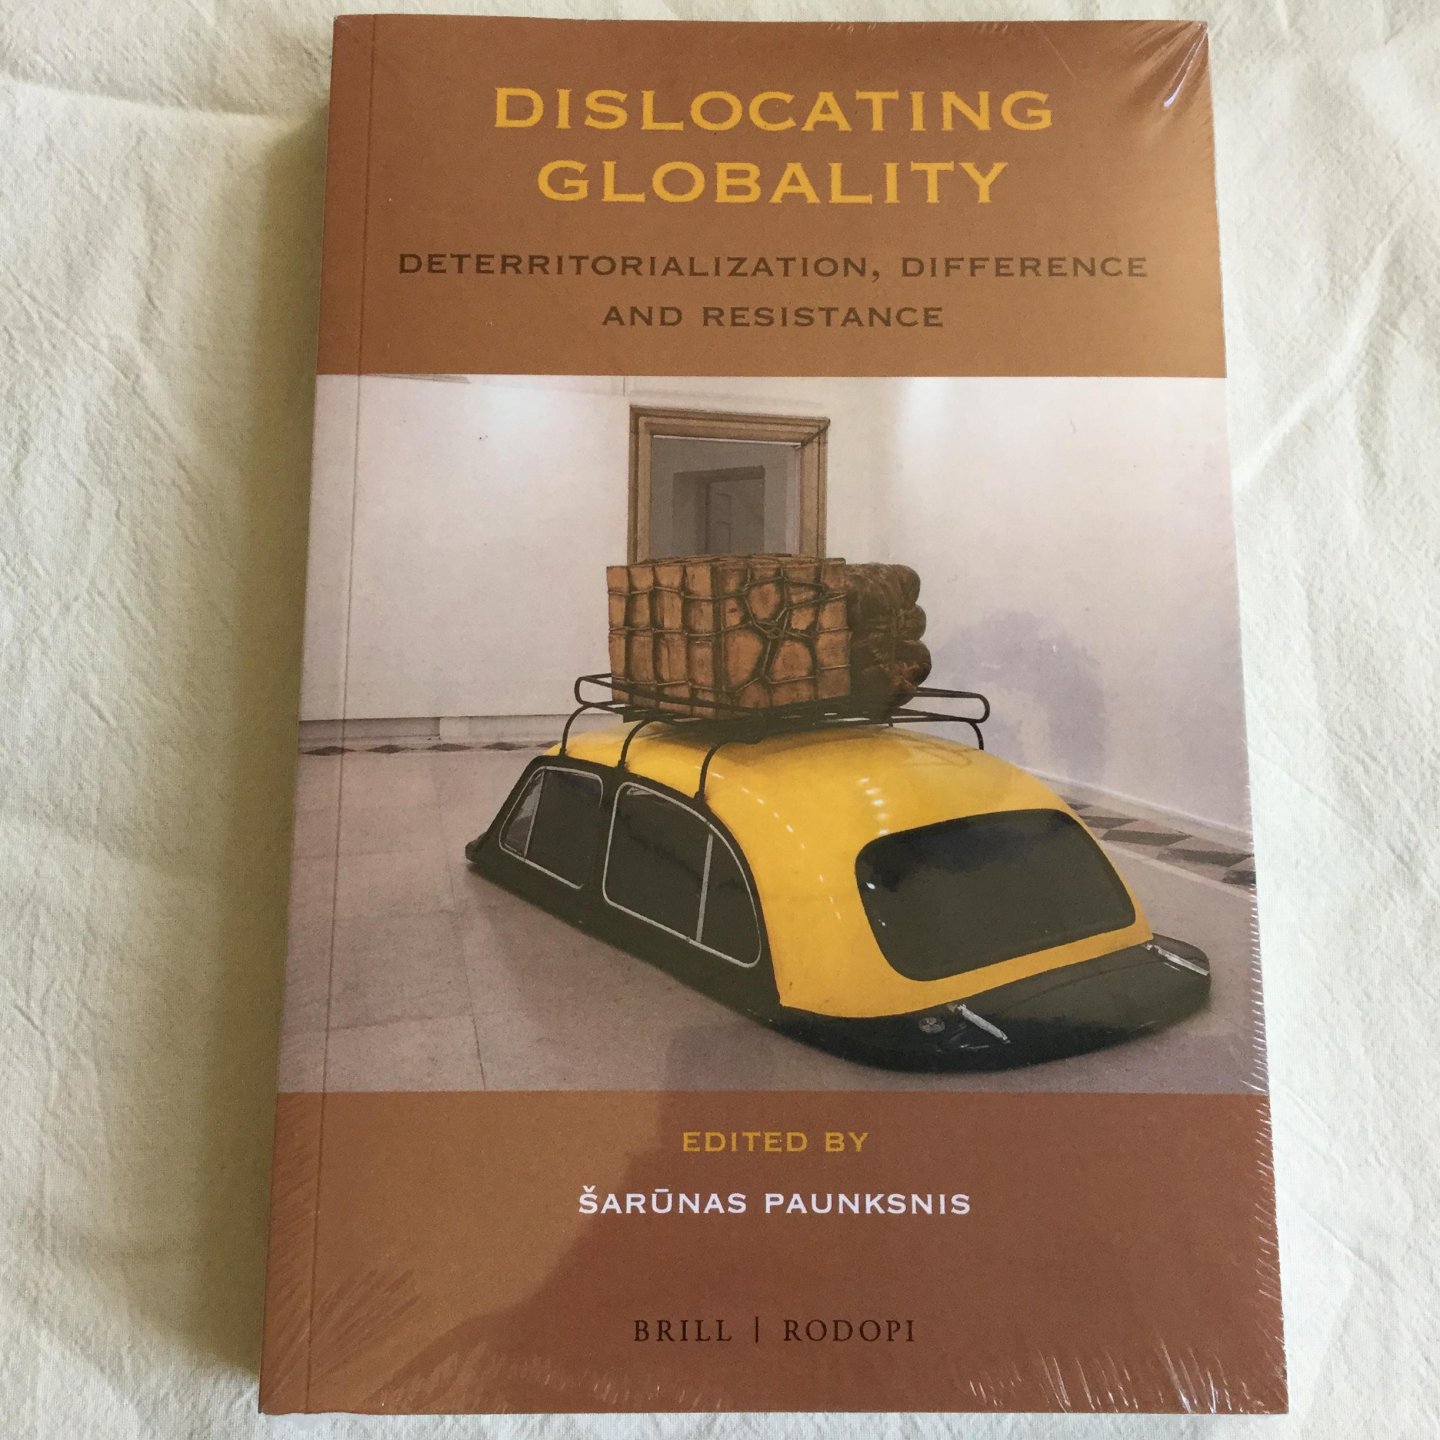 Sarunas Paunksnis (editor) - Dislocating Globality: Deterritorialization, Difference and Resistance (At the Interface/Probing the Boundaries; Volume 89)